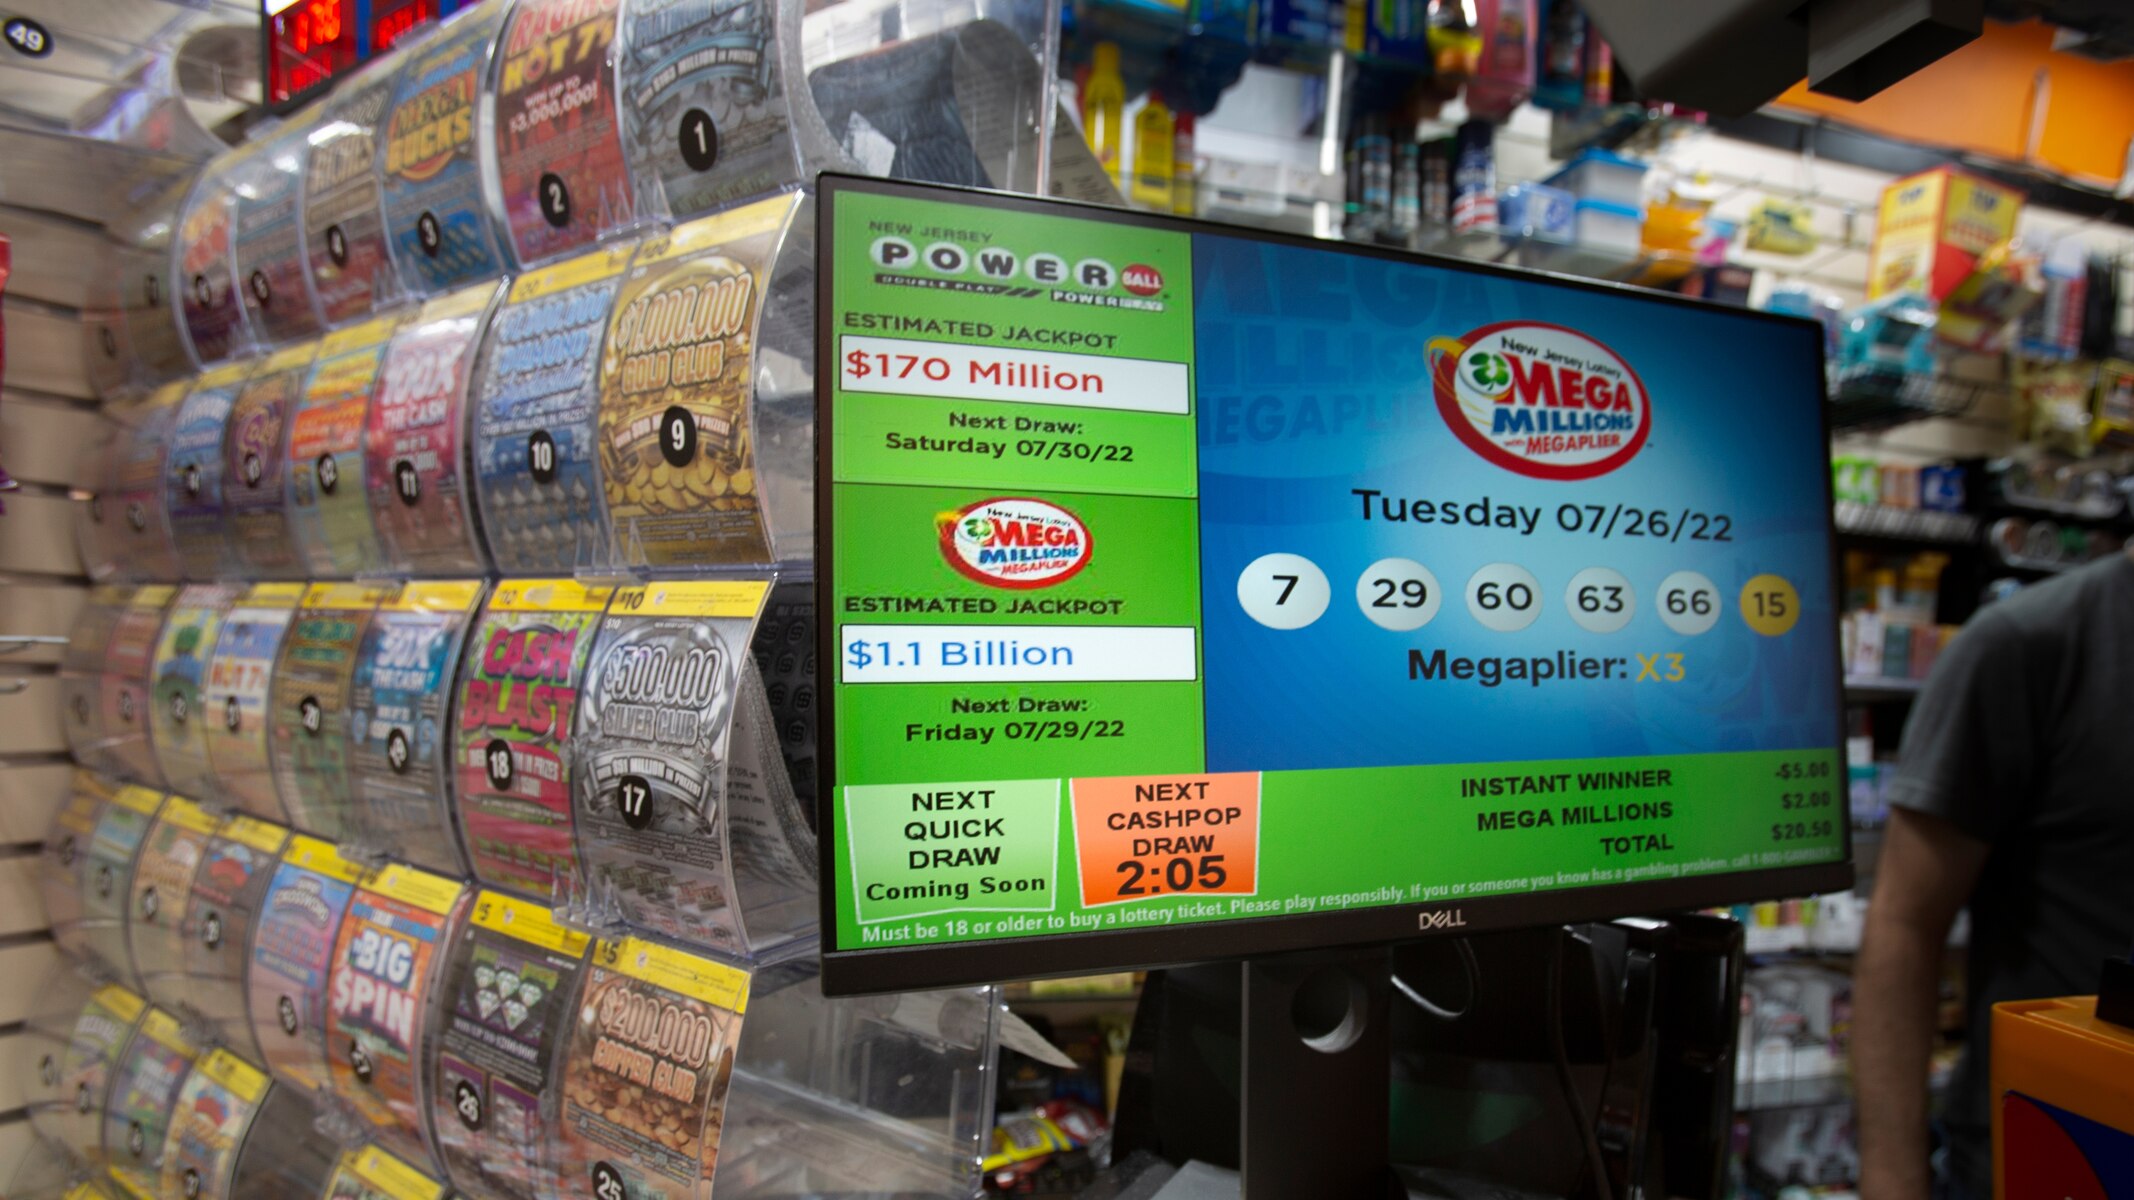 How To Watch Mega Millions Live